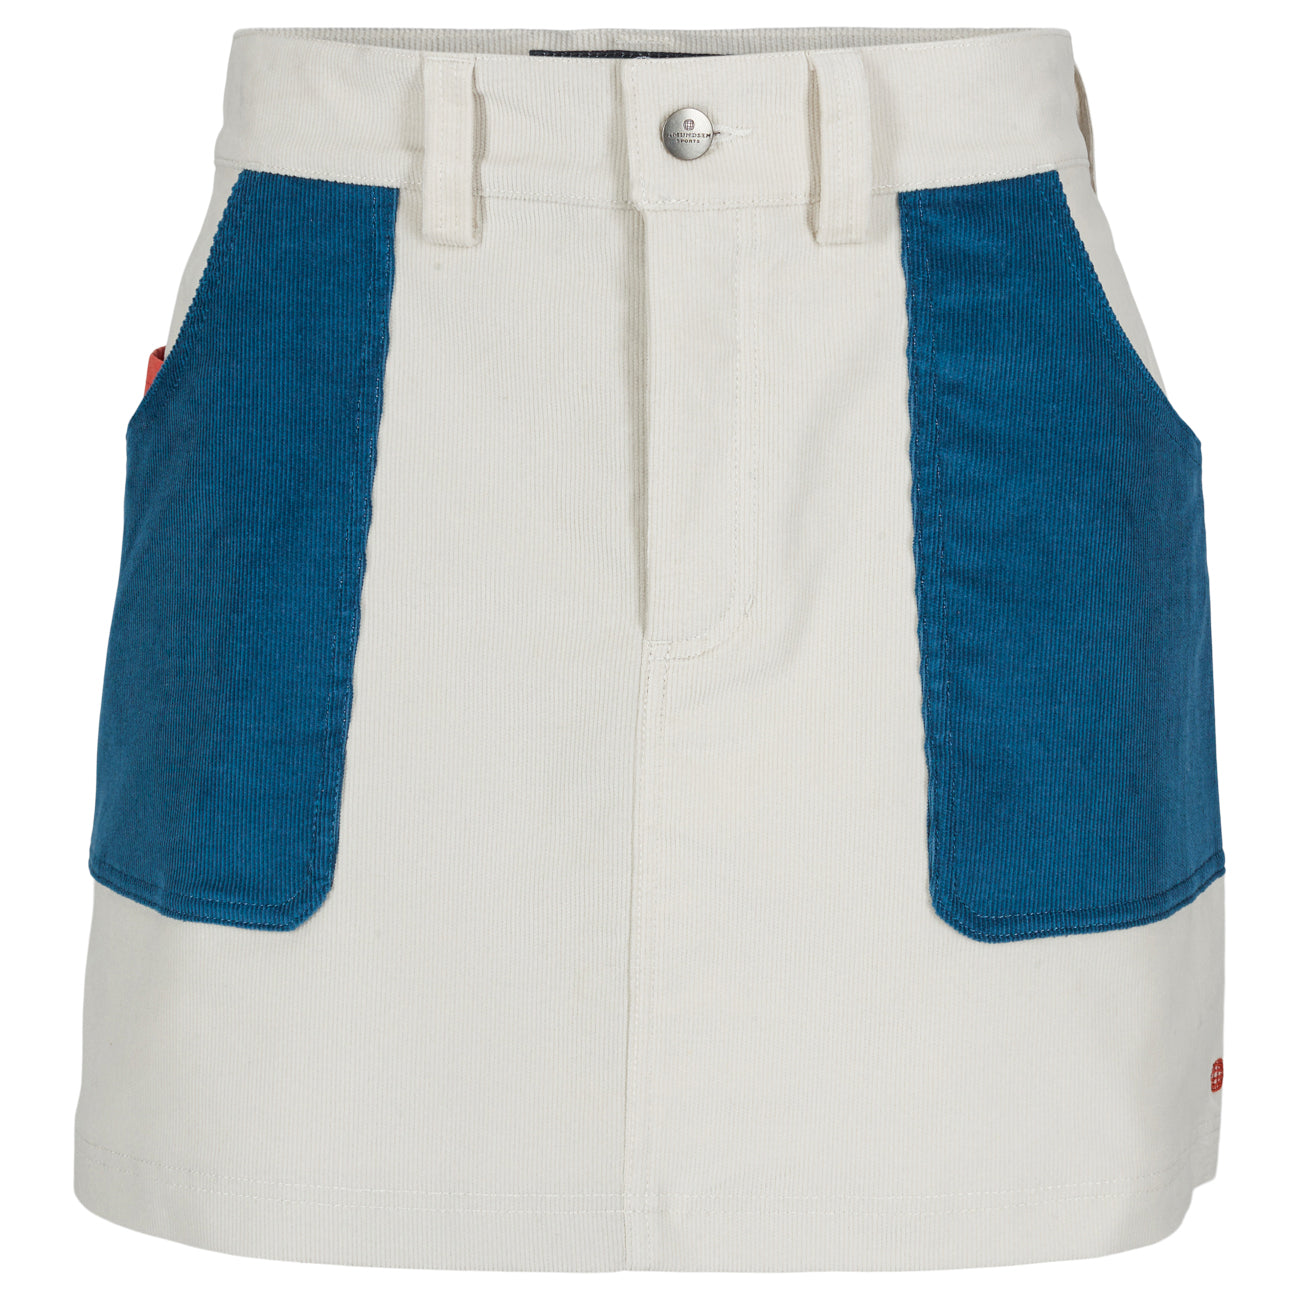 Concord Skirt Womens - Natural/Faded Blue